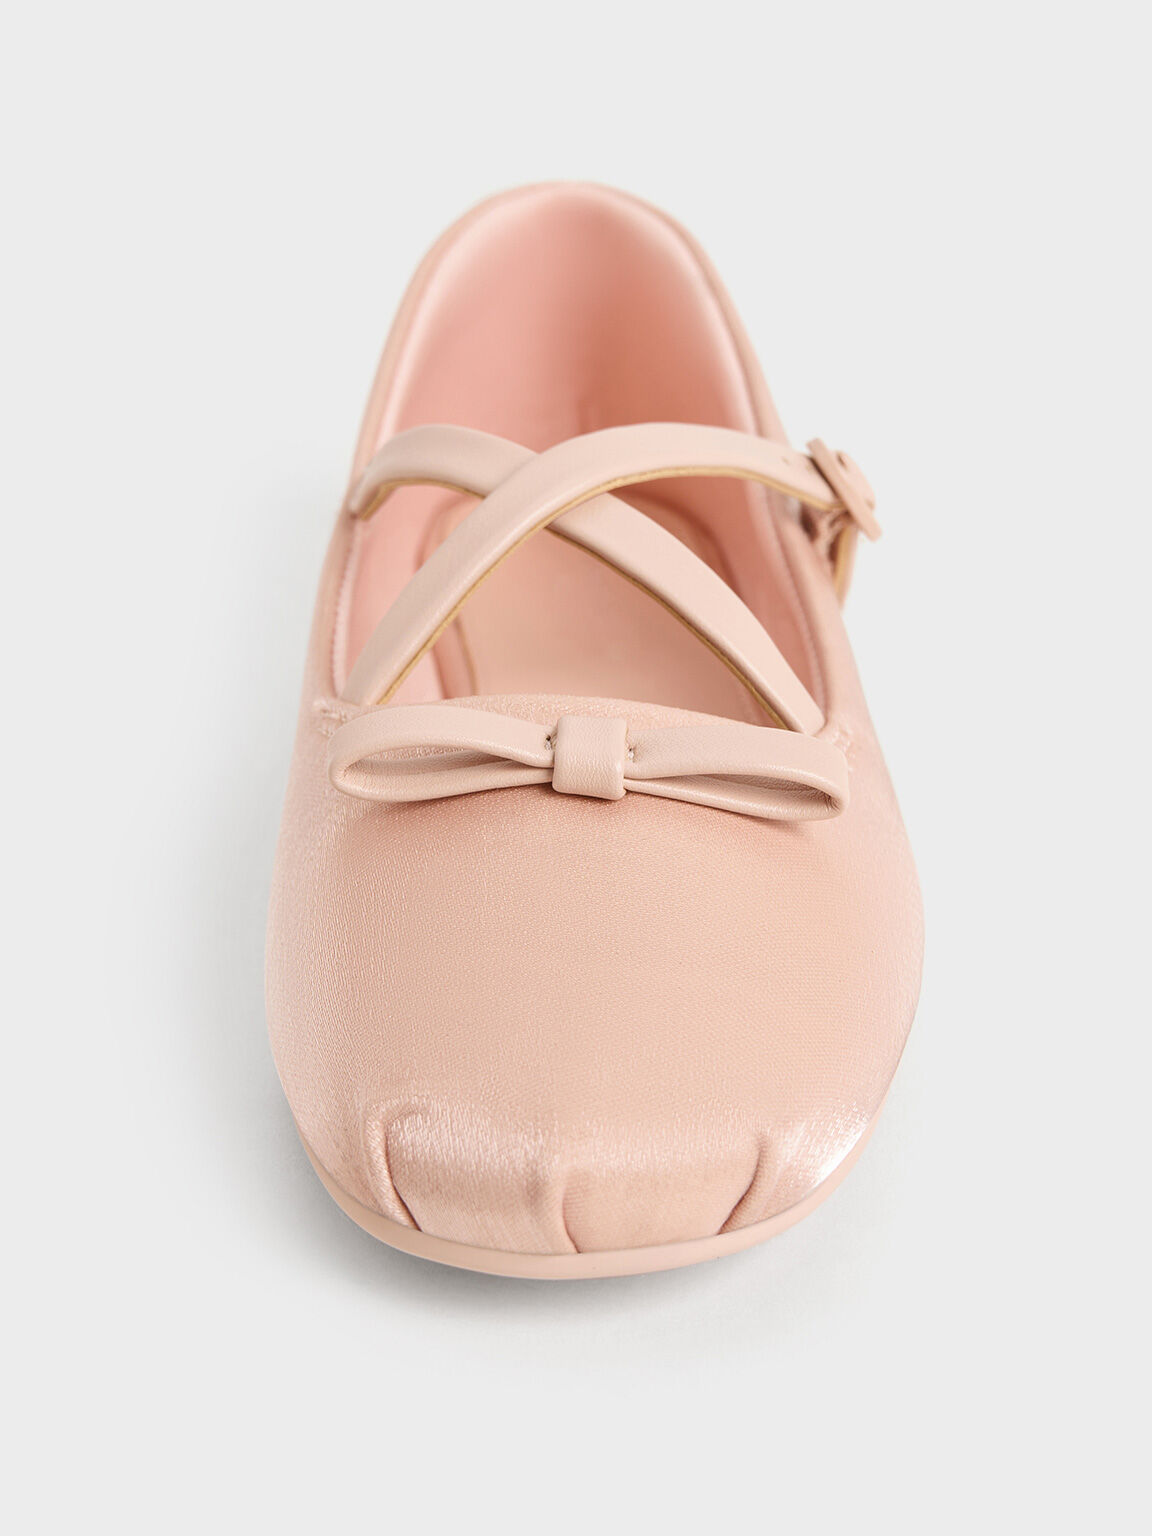 Girls' Bow Mary Janes, Light Pink, hi-res